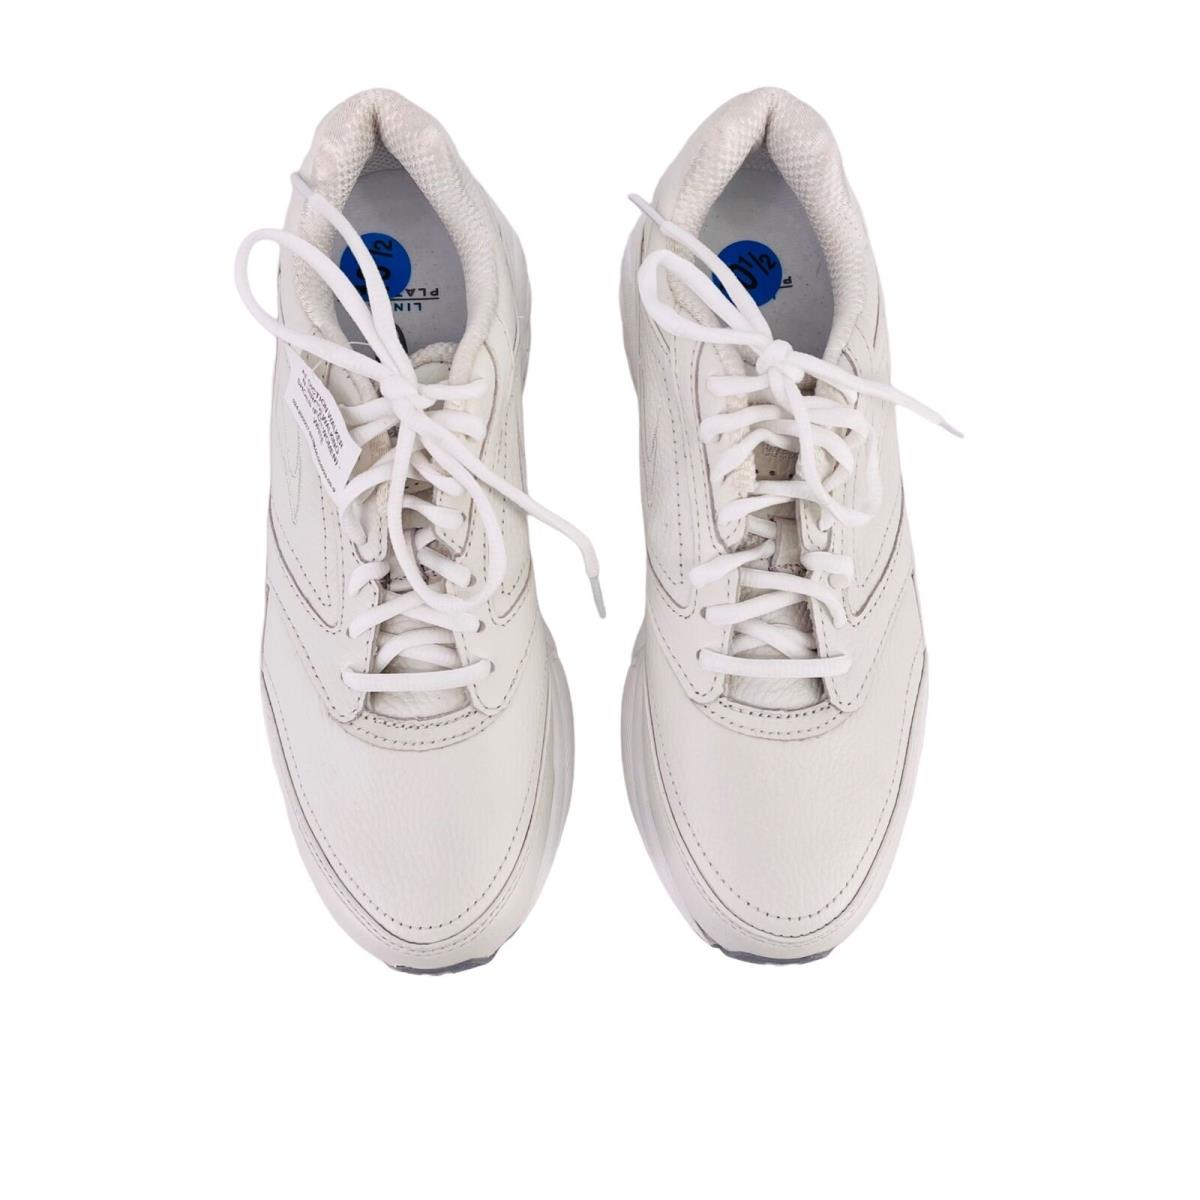 Brooks Addiction Walker White Leather Walking Shoes Sneakers 10.5 Narrow